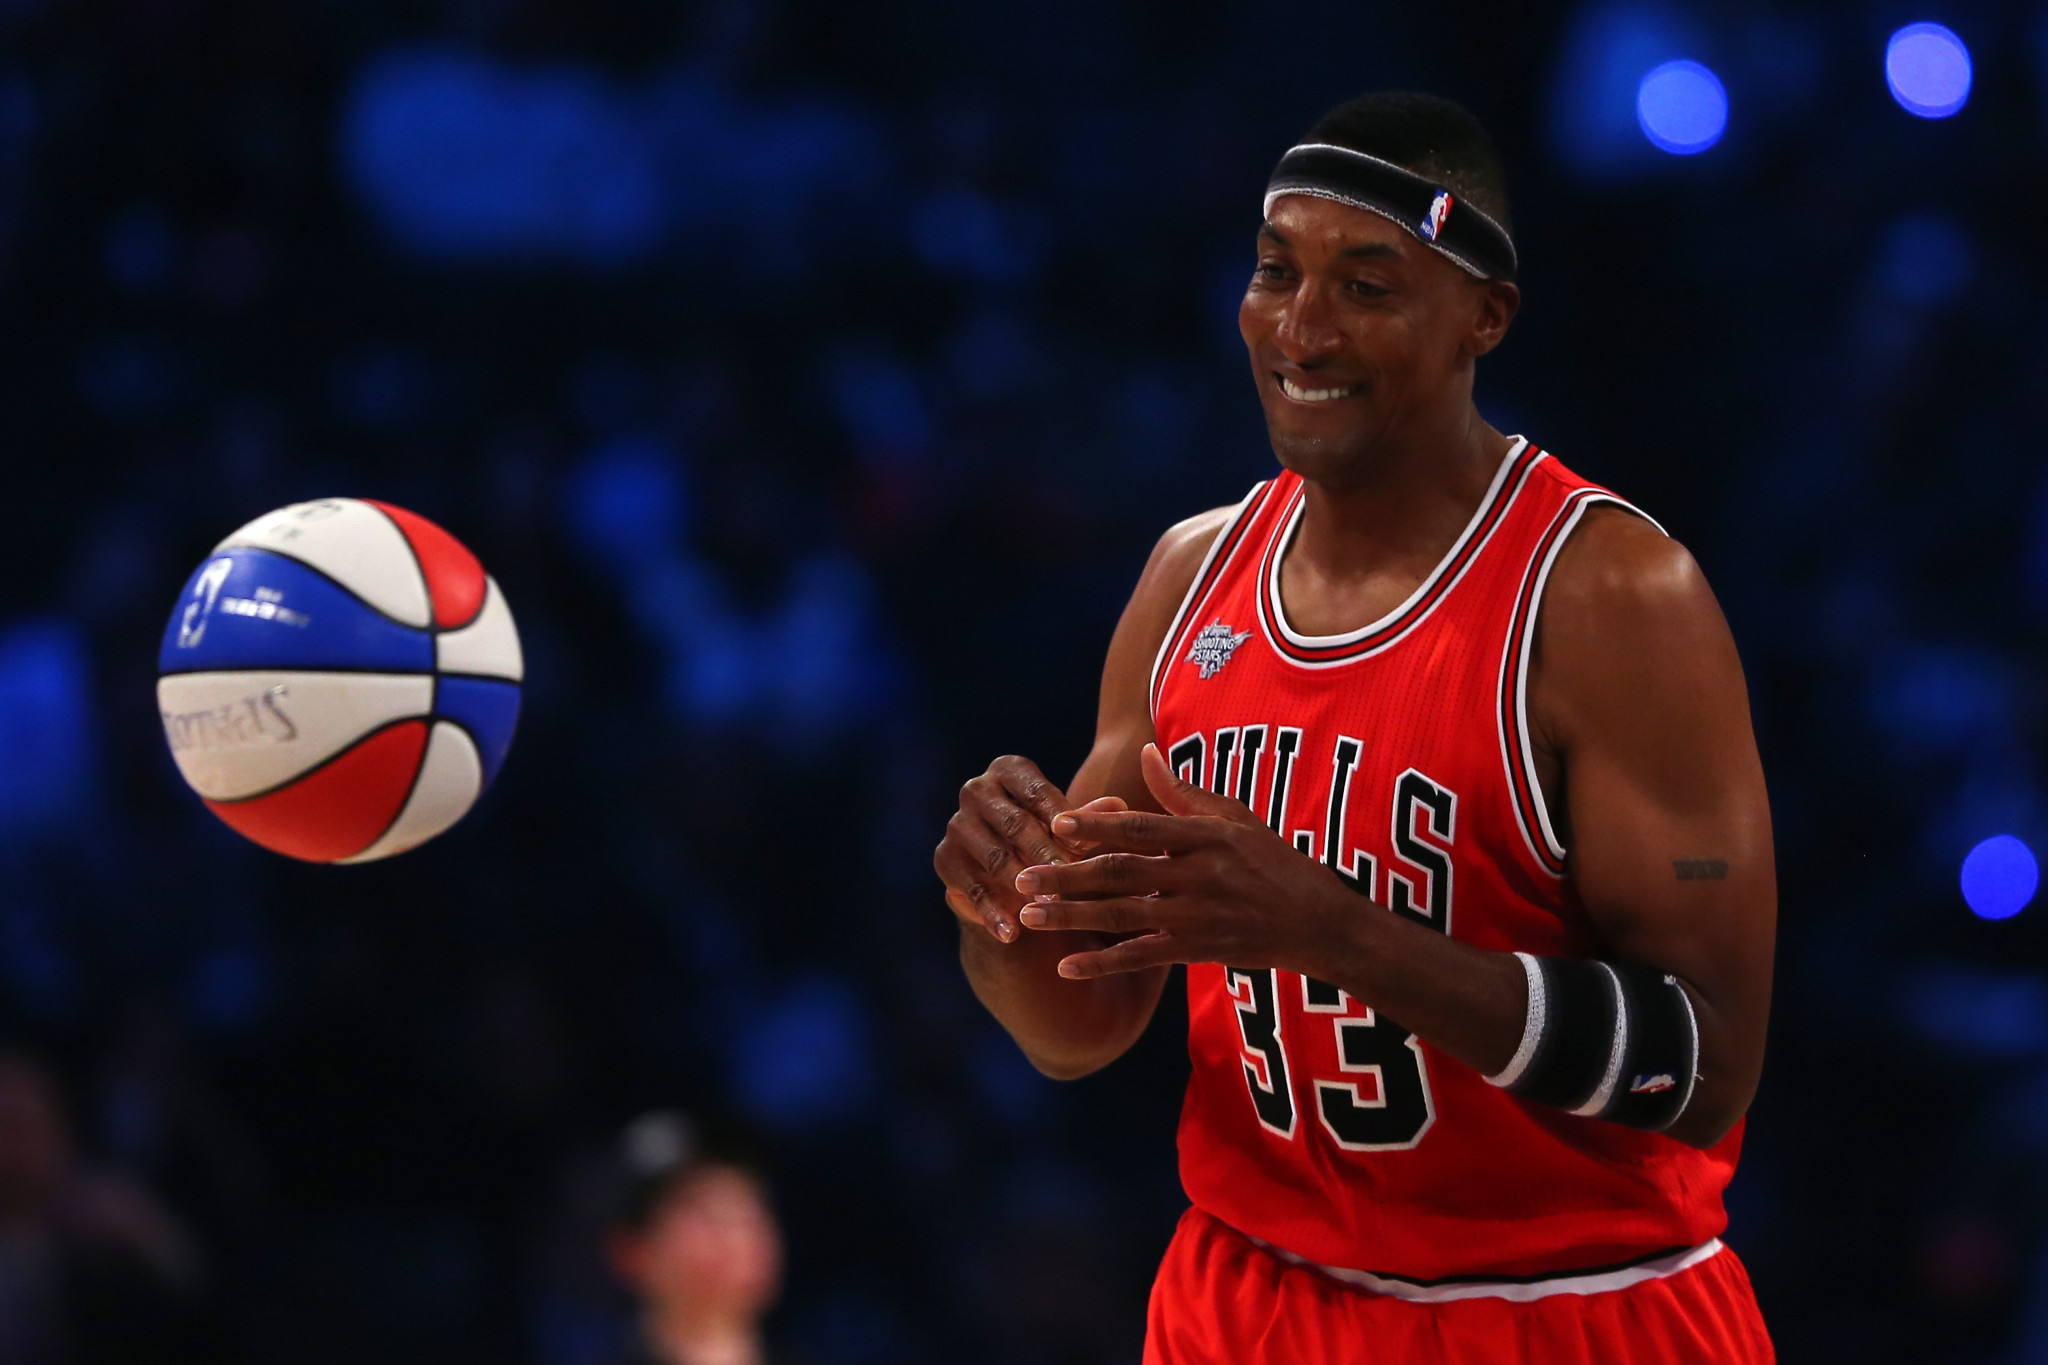 Basketball star Scottie Pippen is one of the athletes involved in the initiative © Getty Images